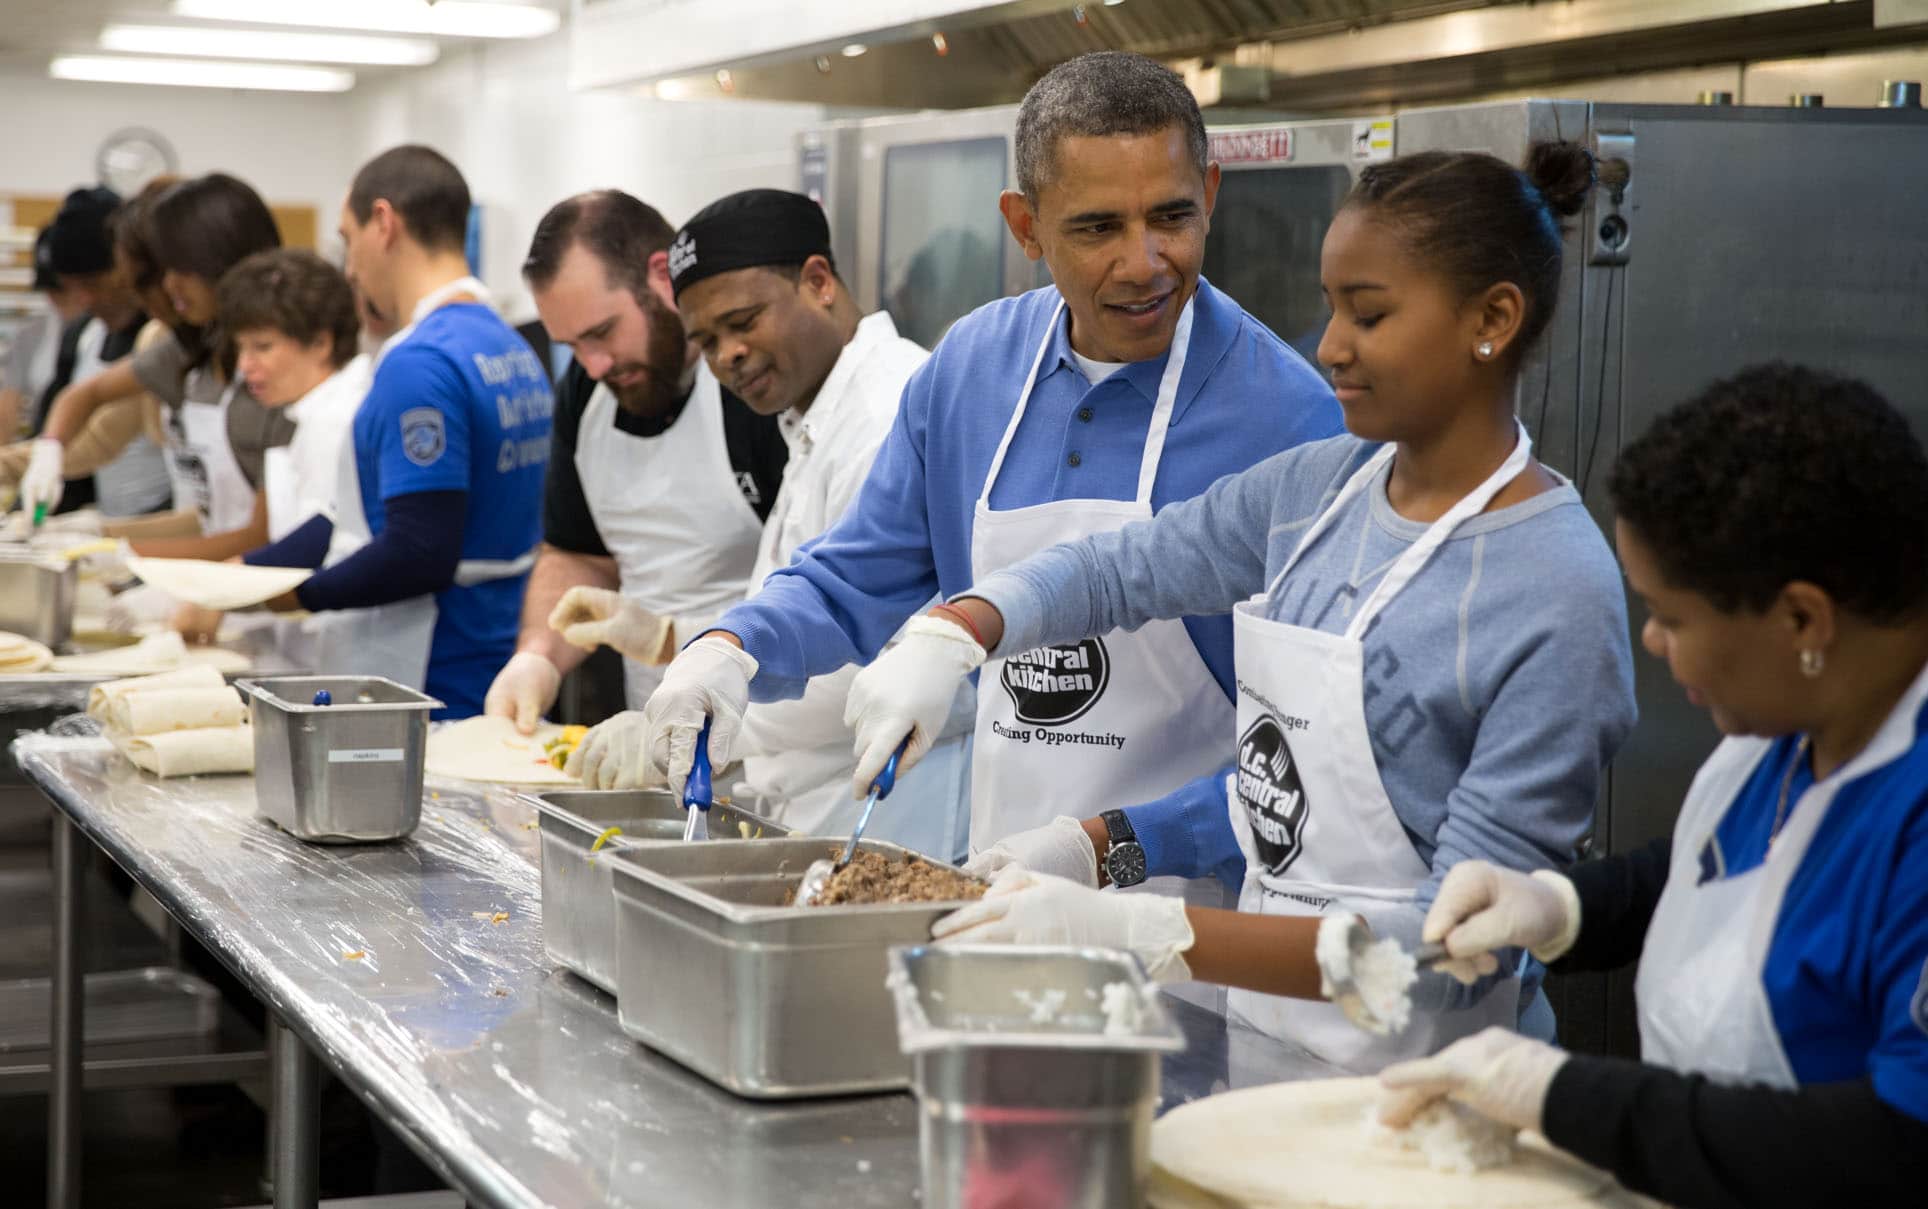 President Barack Obama talks with daughter Sasha, as they along with First Lady Michelle Obama, and daughter Malia prepare burritos while volunteering at the DC Central Kitchen in Washington, D.C., on Martin Luther King Day, Jan. 20, 2014. (Official White House Photo by Pete Souza)